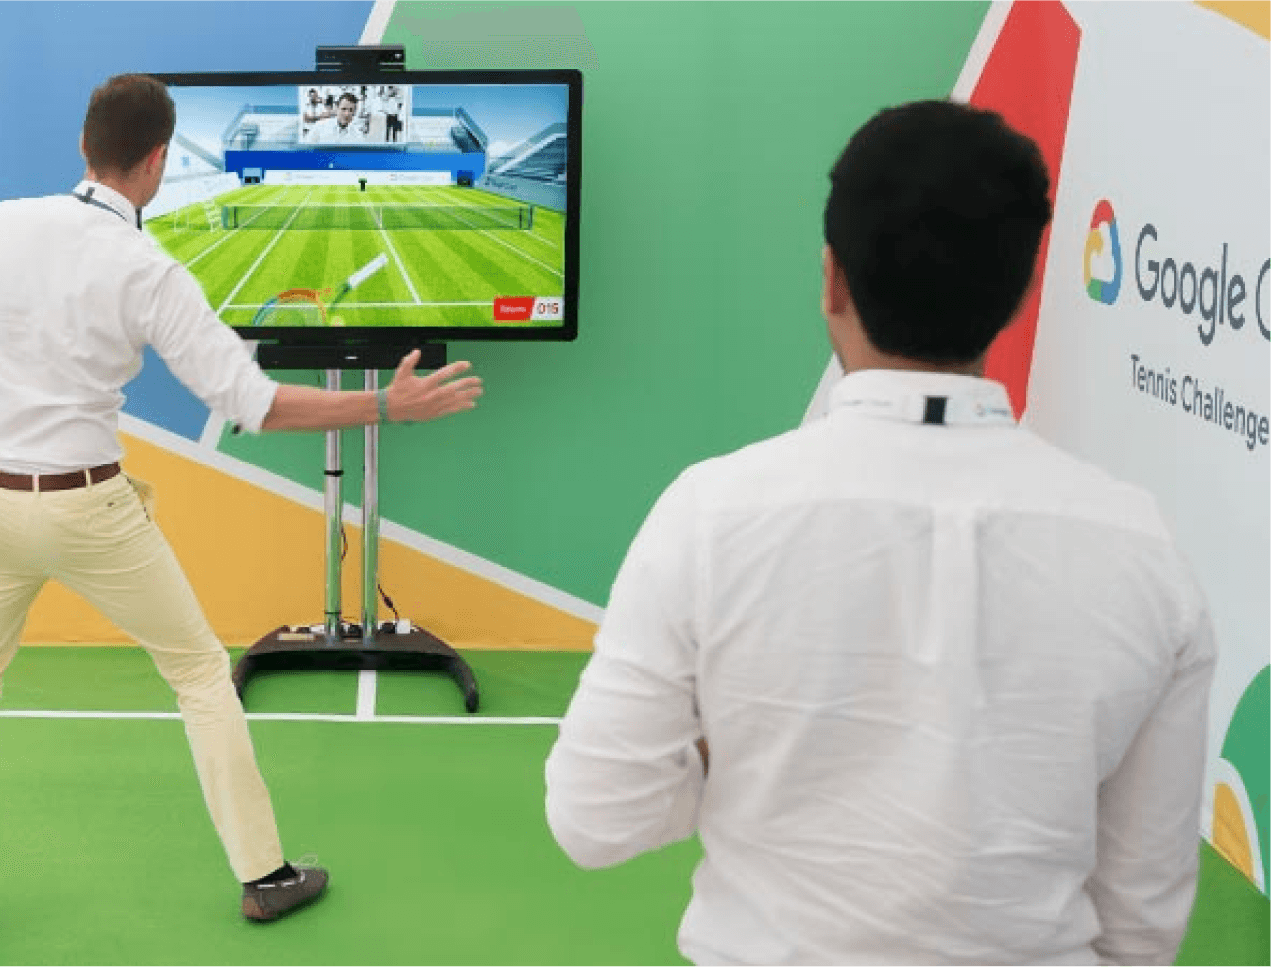 Body-tracking tennis game for Google event